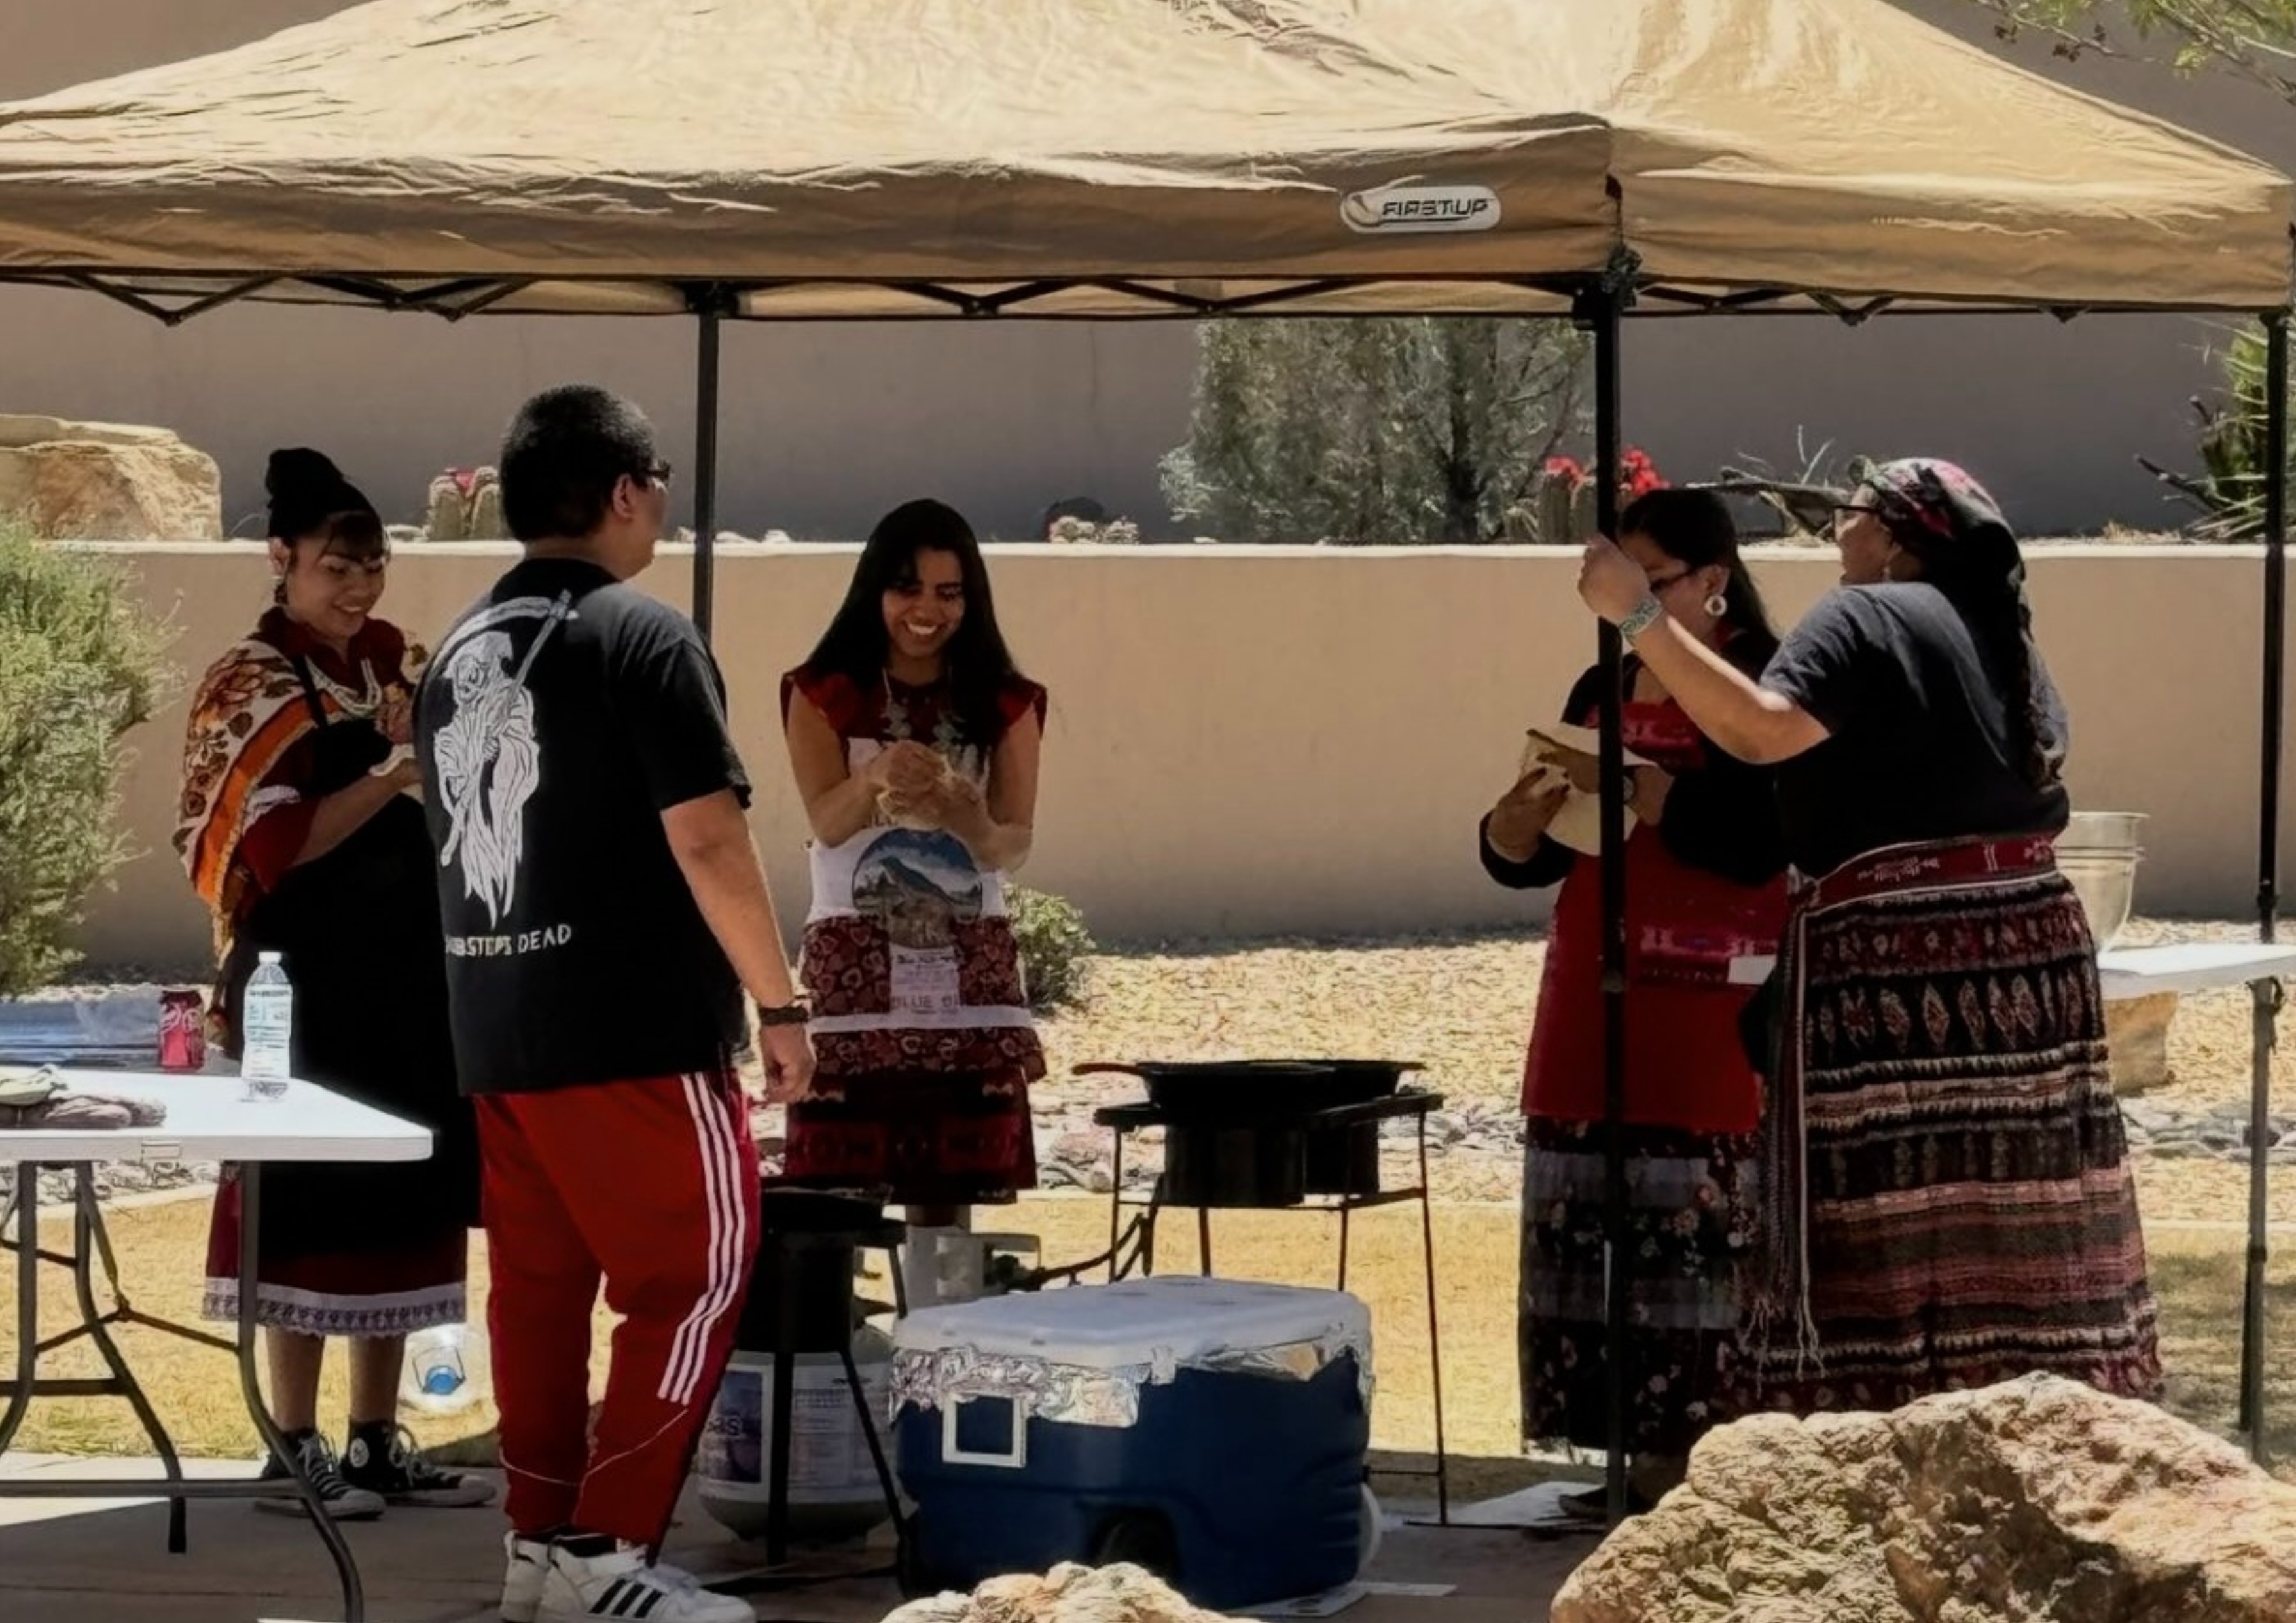 AIW Indian Taco Frybread Making. A group of four people, three women and one man, under a beige canopy tent in a sunny, desert-like setting.